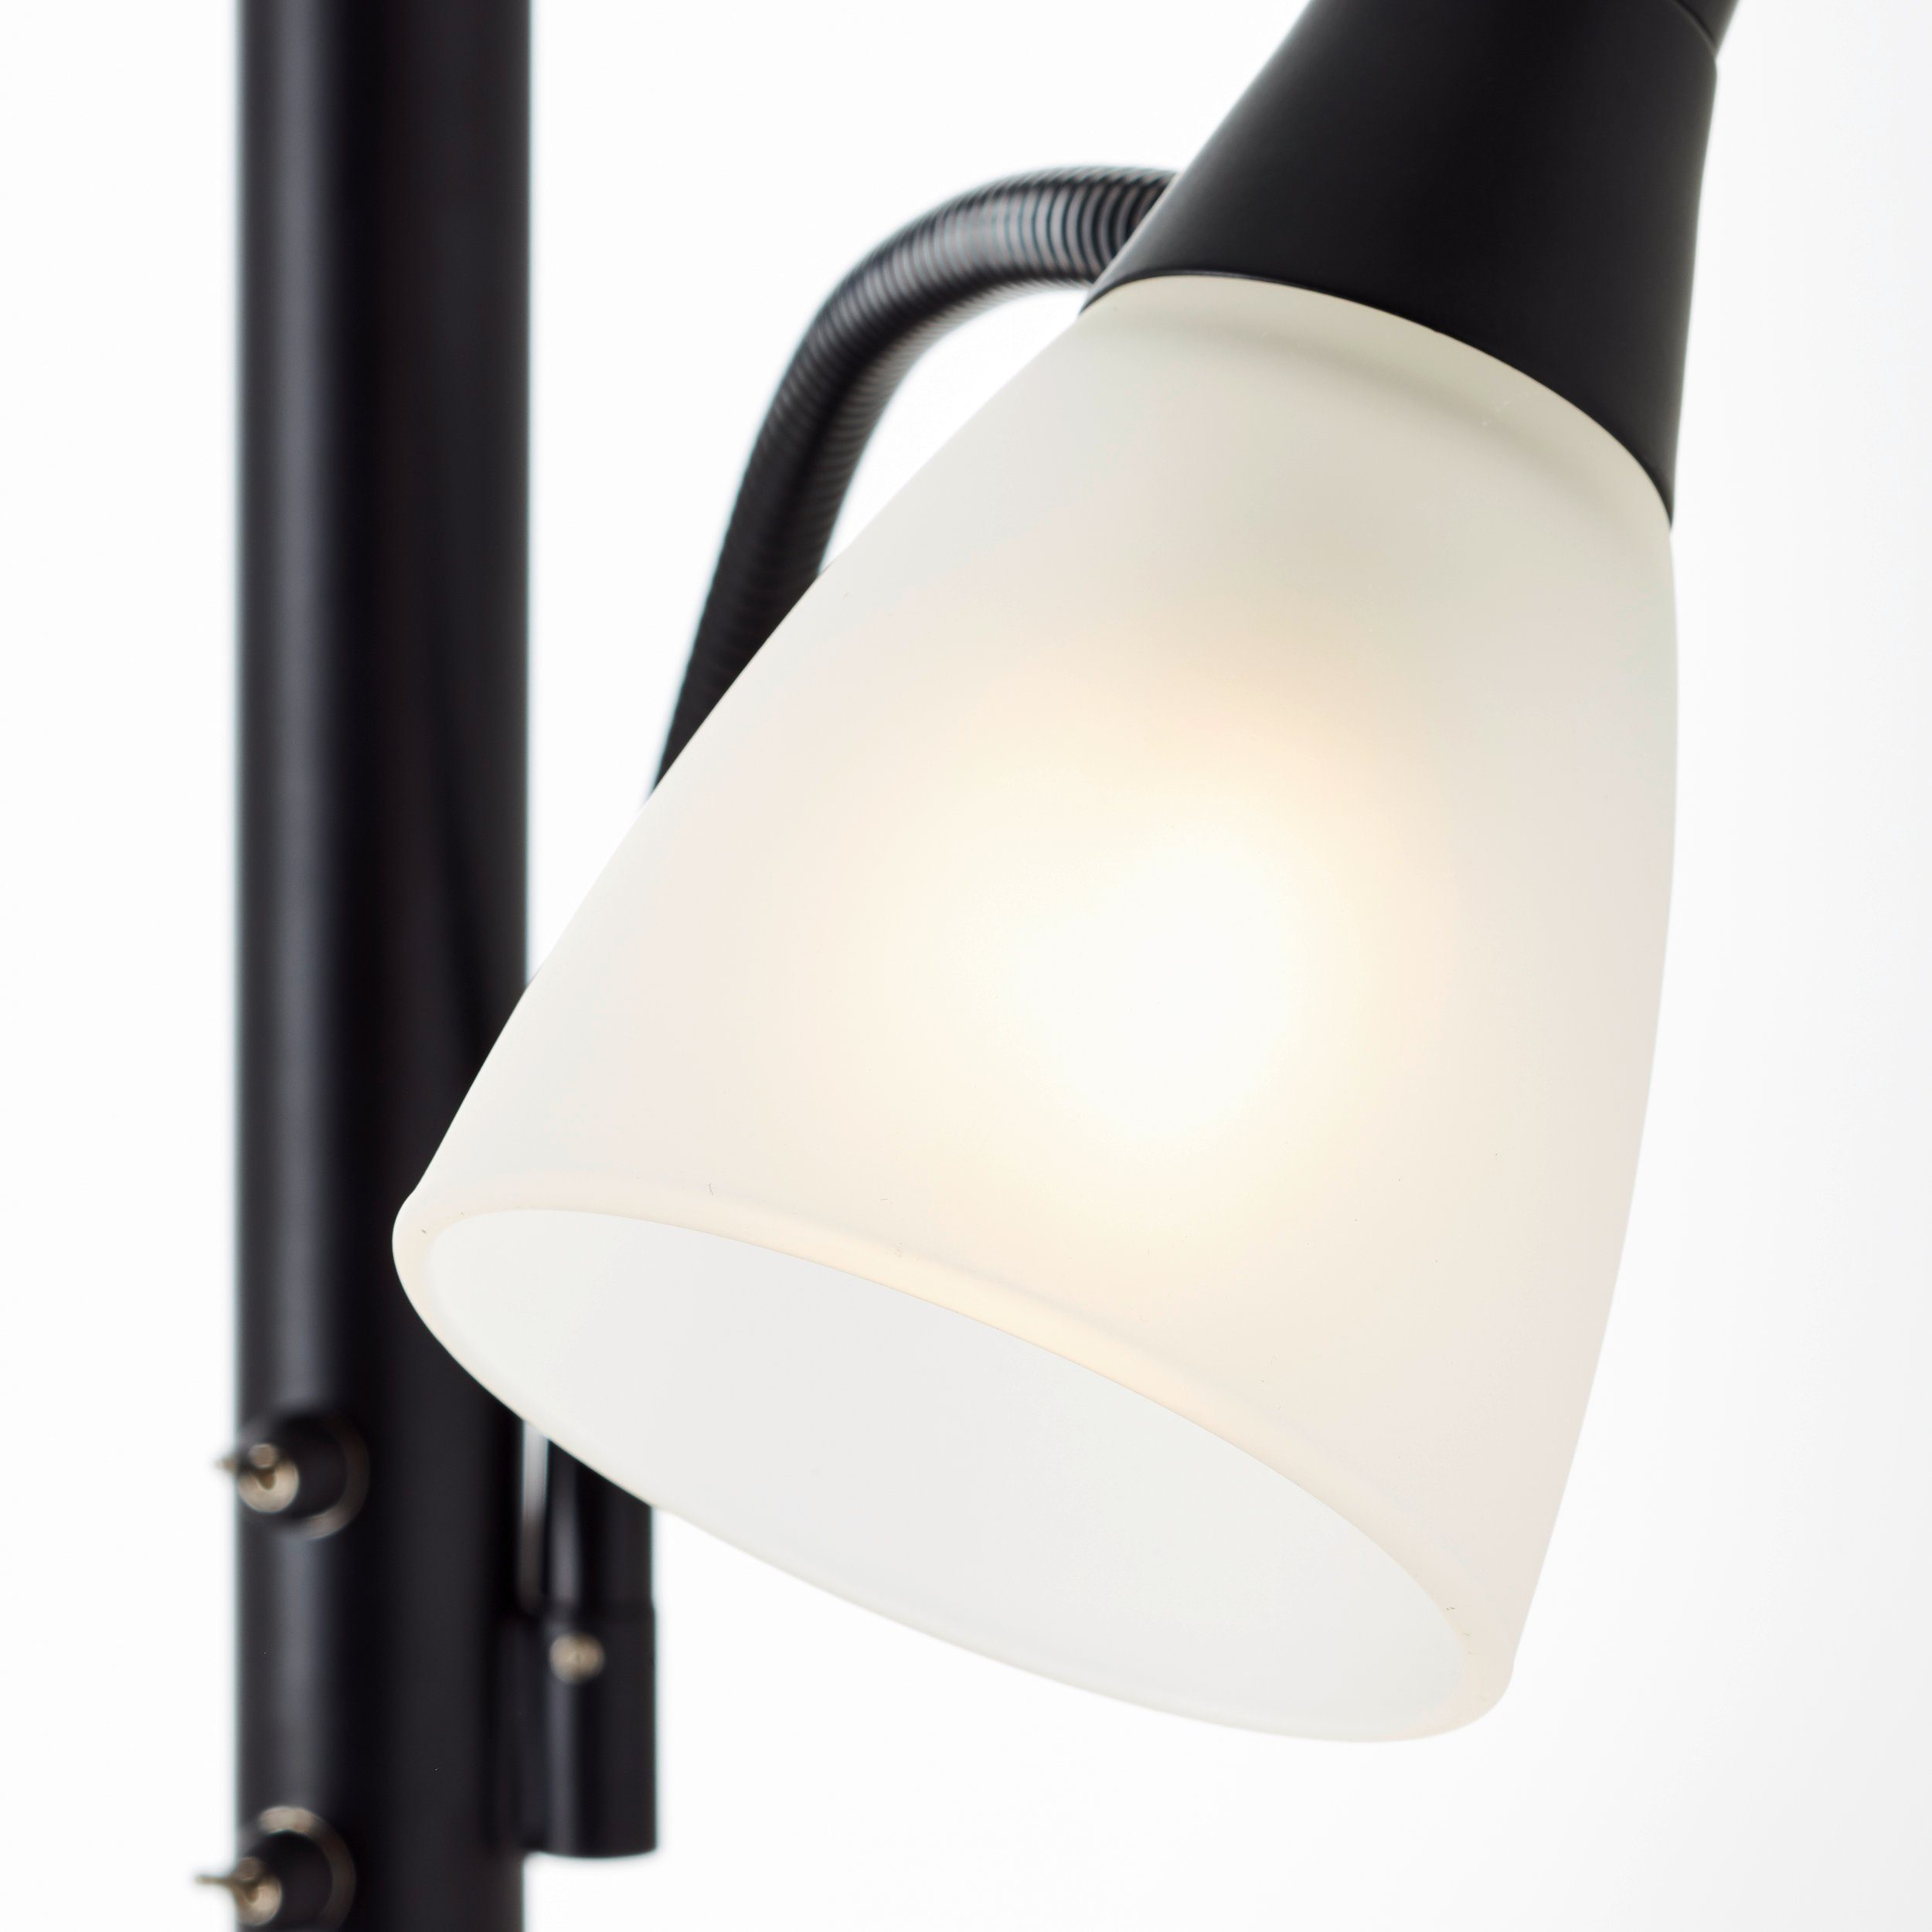 Brilliant Stehlampe Lucy, Lucy W Lesearm E27, A60, Metall/Glas, Deckenfluter 5 schwarz, LED 1x